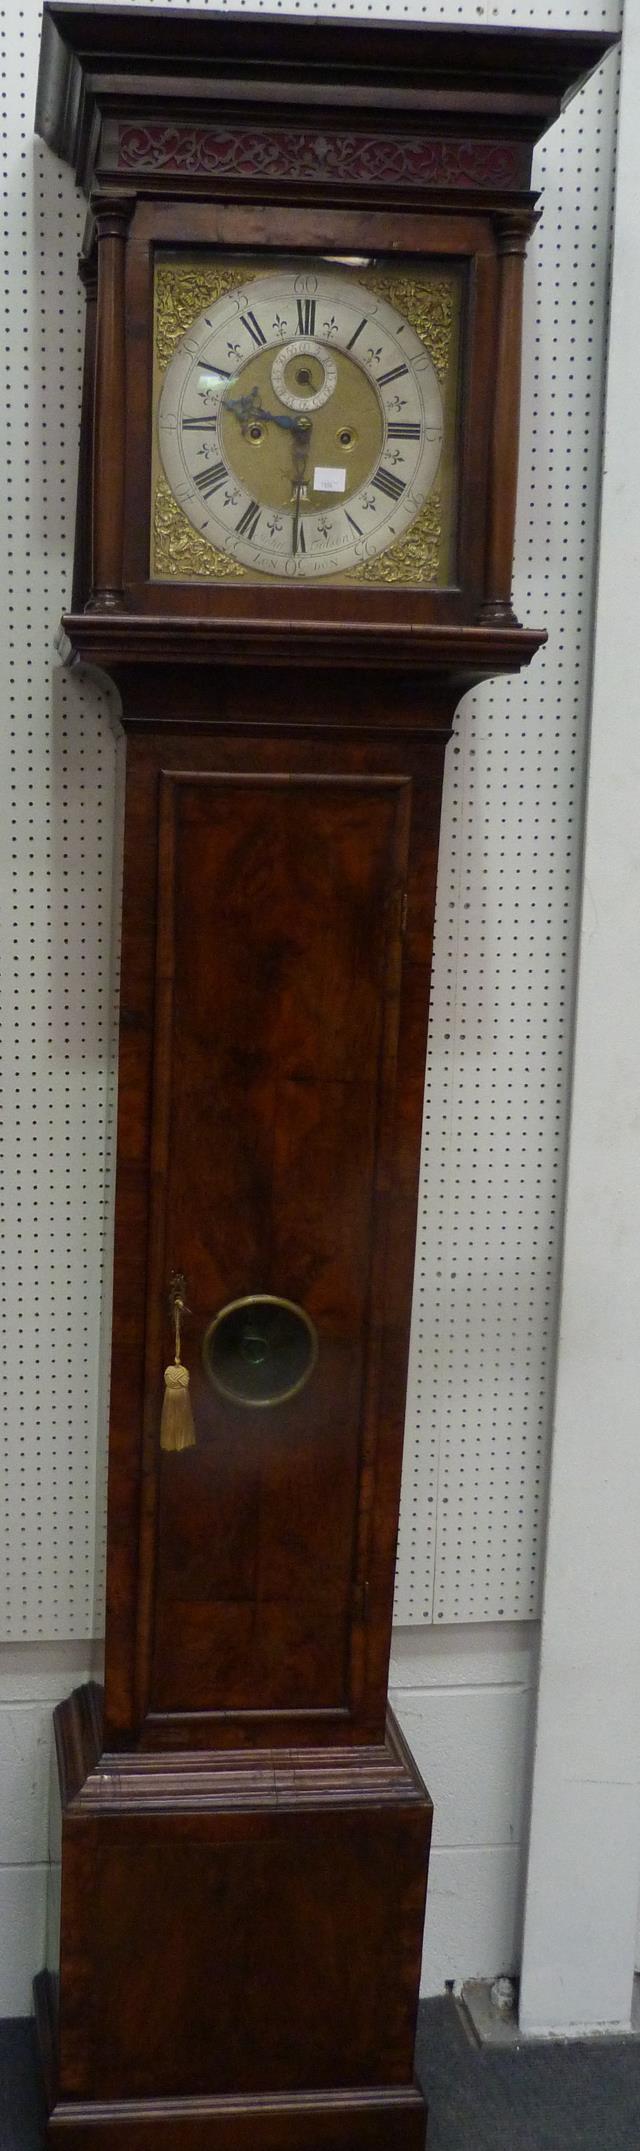 This is a Timed Online Auction on Bidspotter.co.uk, Click here to bid. A Tall Fine 18th Century